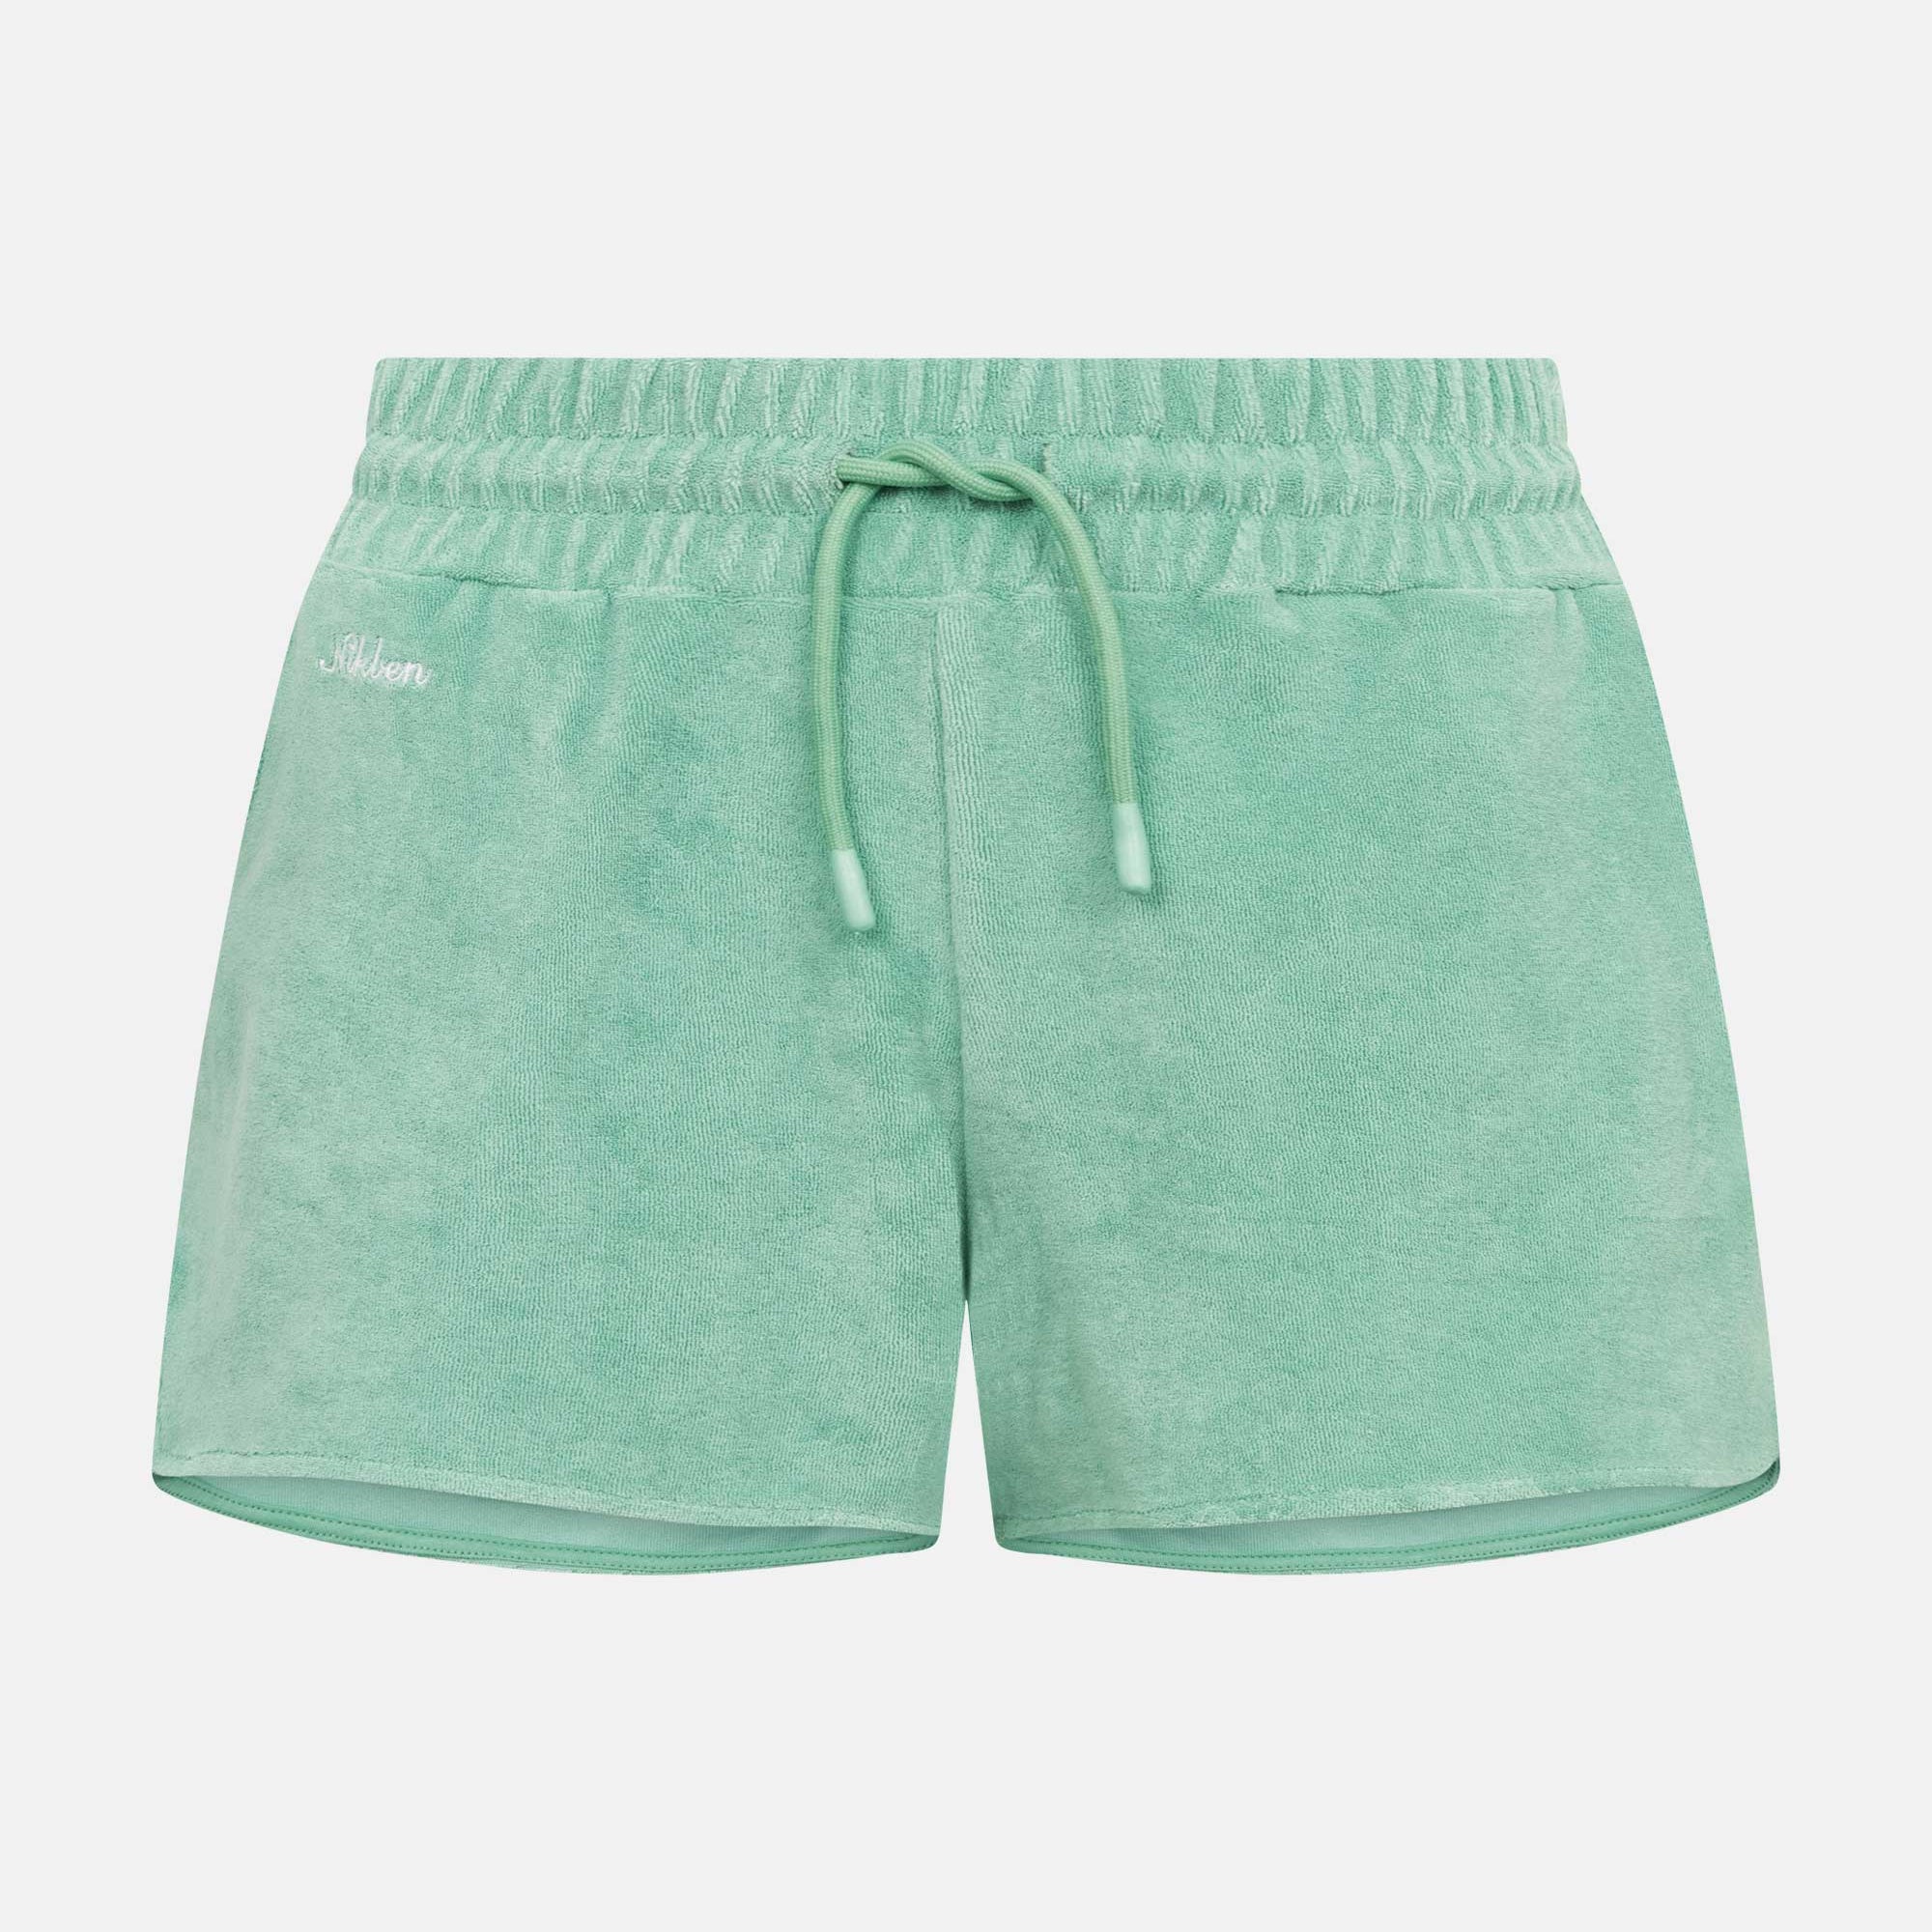 Grey-green low cut shorts in terry toweling fabric with drawstring and two side pockets.